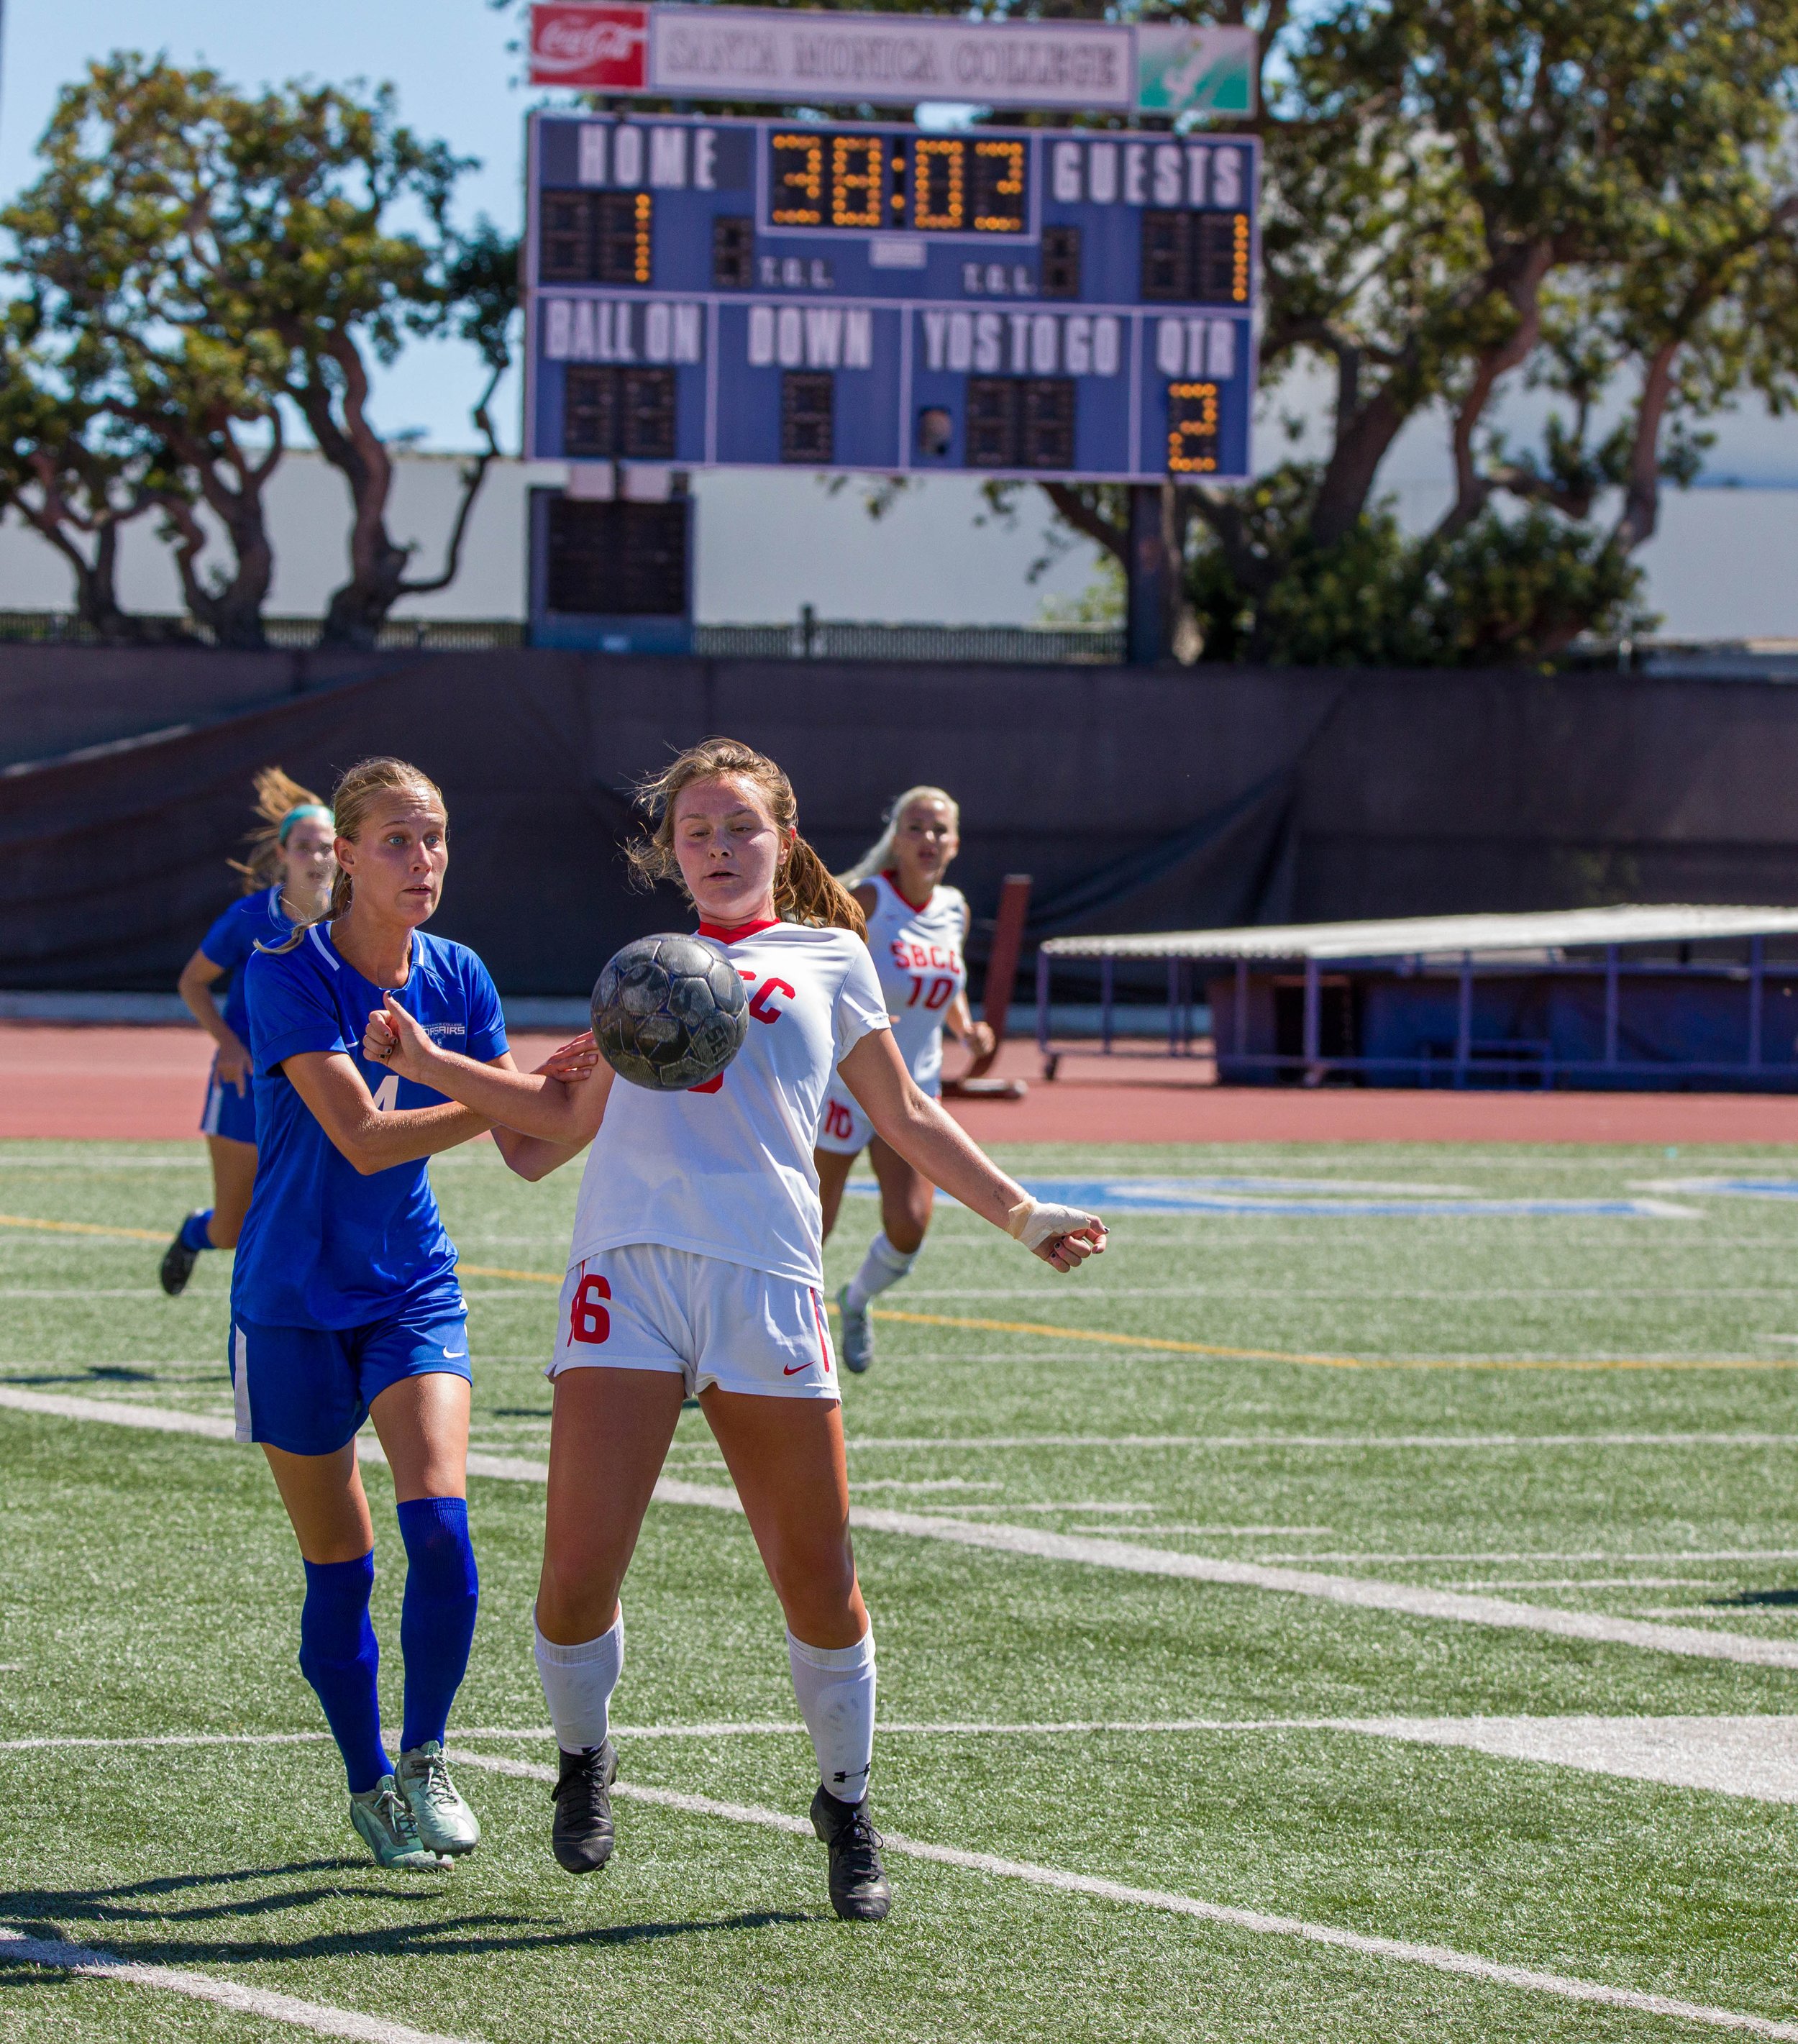  Santa Monica College(SMC) Corsair forward Emma Rierstam trying to get possesion of the ball while Santa Barbara City College(SBCC) midfielder Hannah Mclain (6,R) stopping the ball with her chest on Tuesday, Spet. 20 at the Corsair Feild in Santa Mon